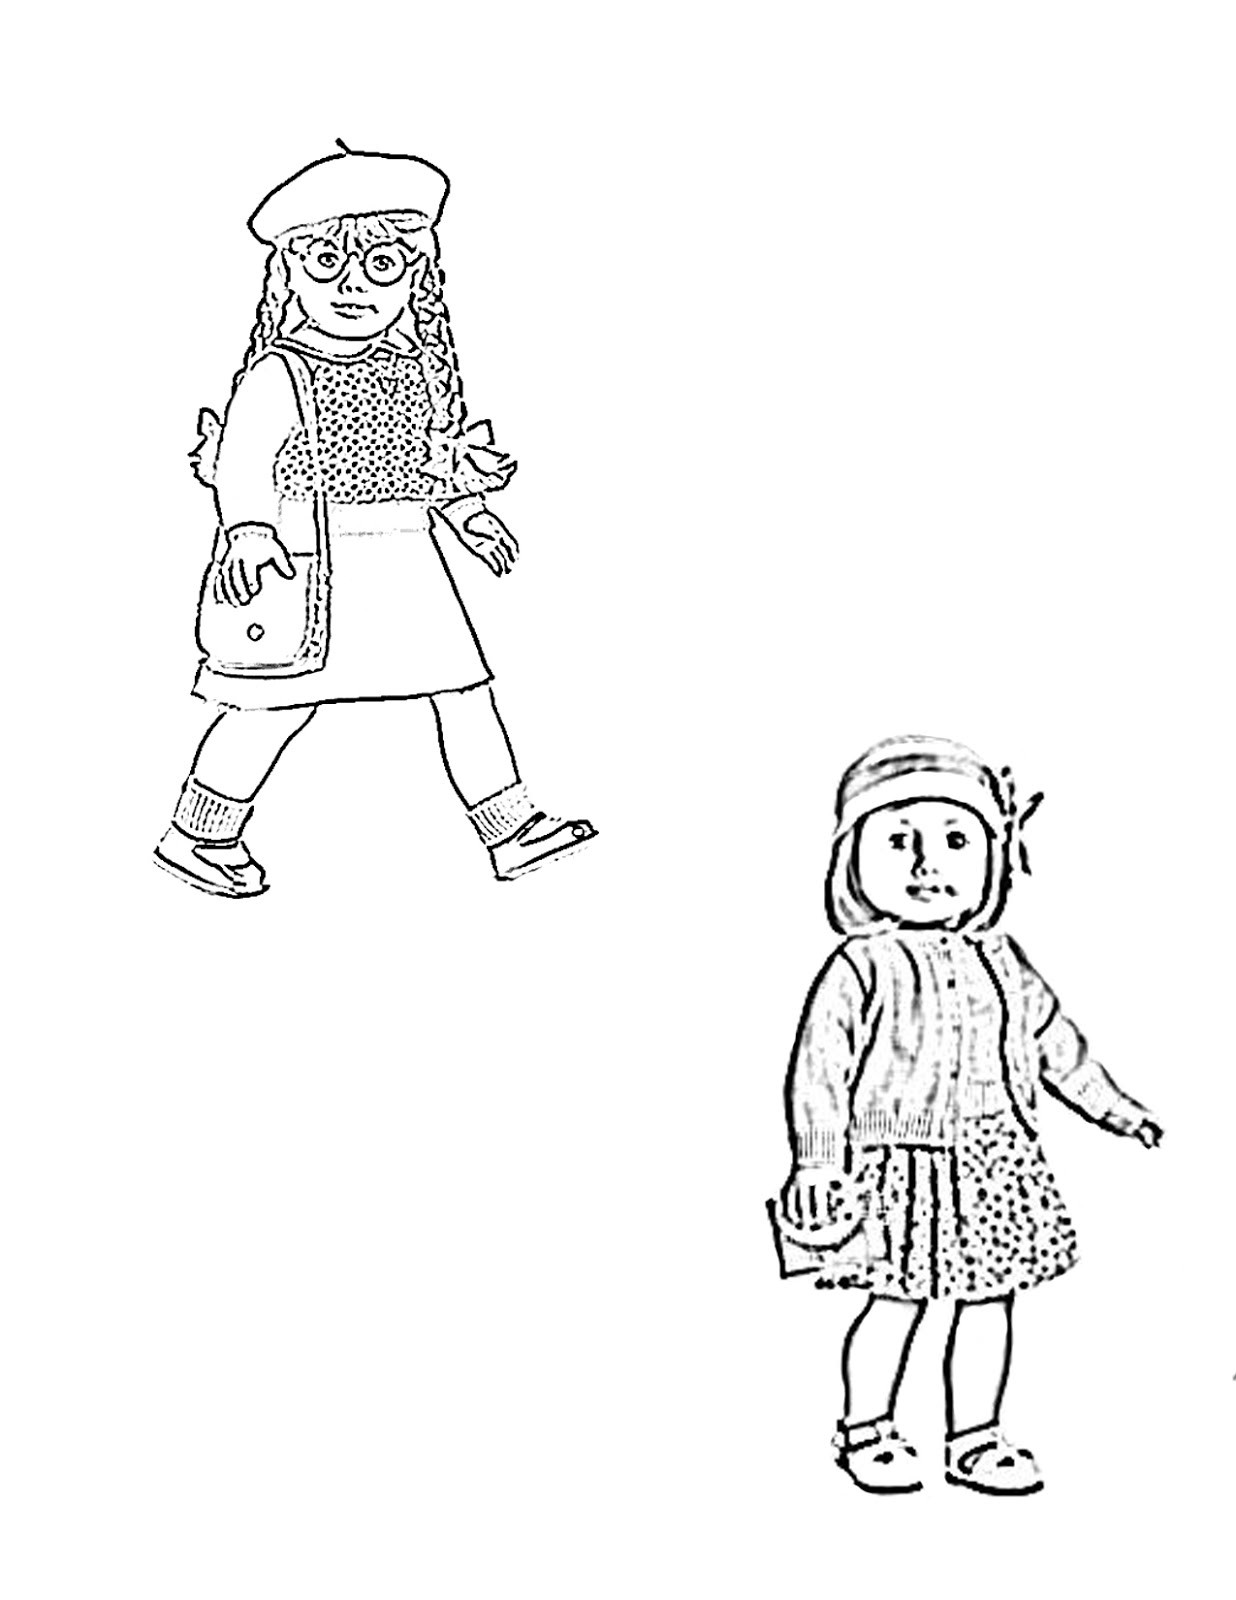 American Girls Coloring Pages
 My Cup Overflows Kit Kittredge An American Girl